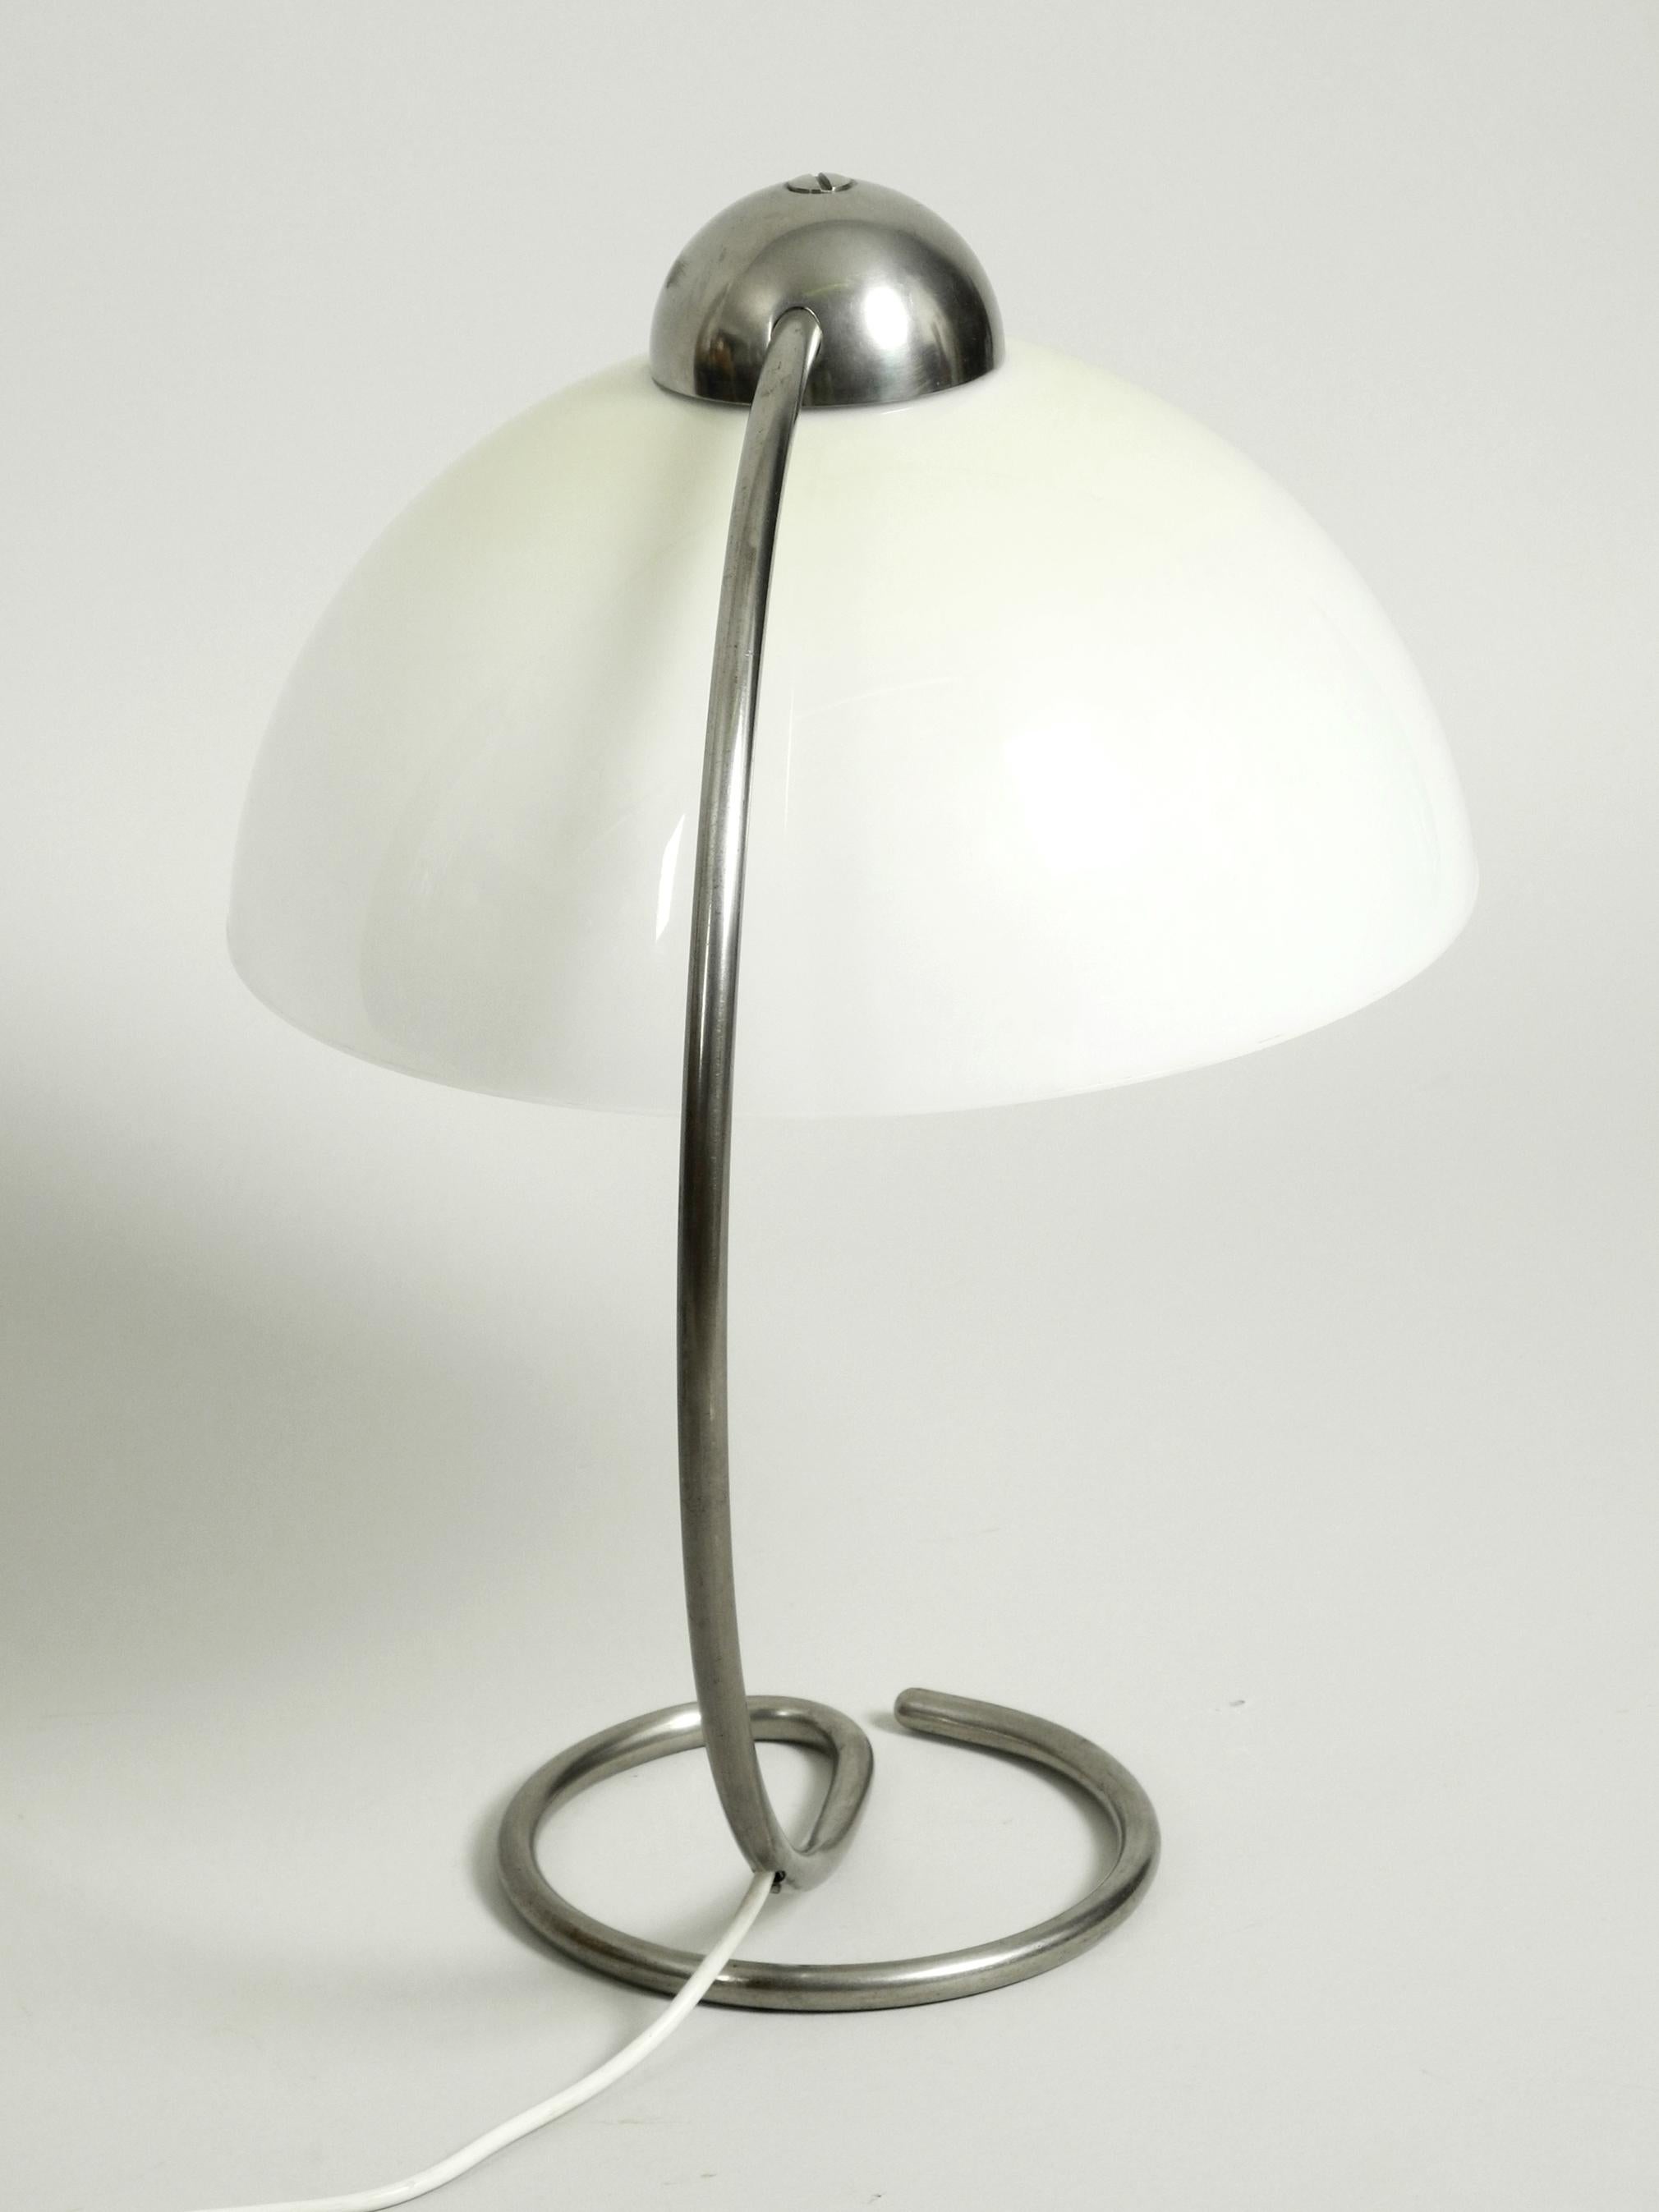 Large Midcentury Metal Table Lamp with Plastic Shade by Schanzenbach, Germany In Good Condition For Sale In München, DE